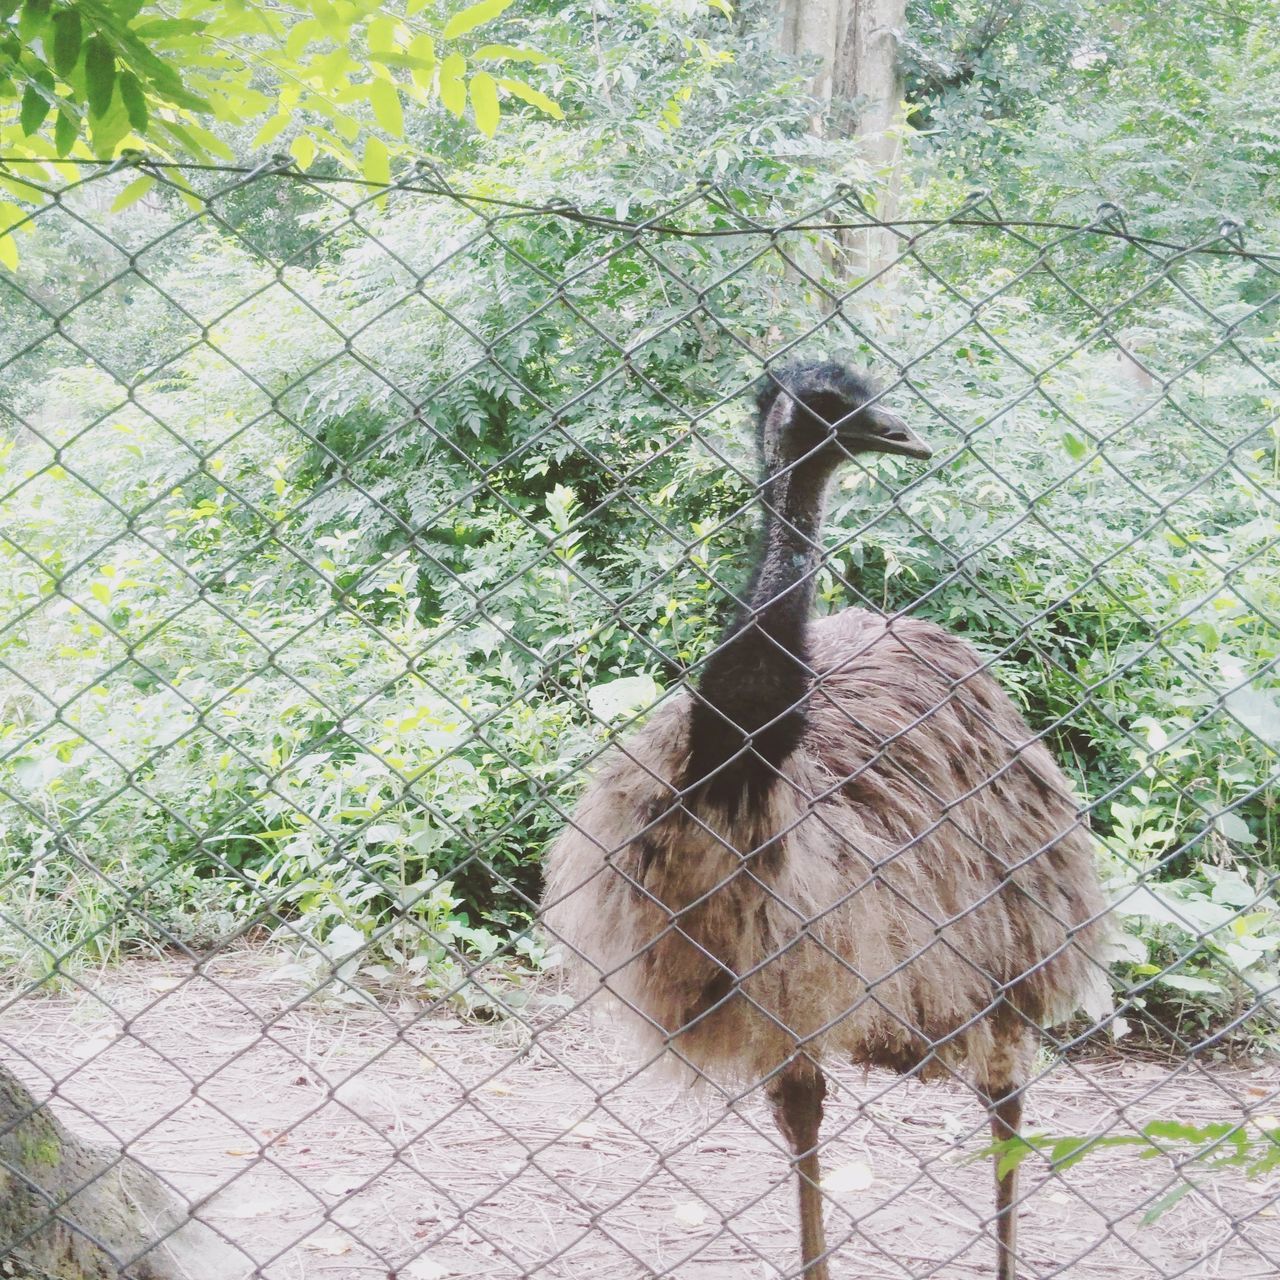 animal themes, animal, bird, emu, fence, animal wildlife, one animal, wildlife, plant, chainlink fence, no people, zoo, day, nature, ratite, ostrich, outdoors, animals in captivity, security, protection, green, standing, tree